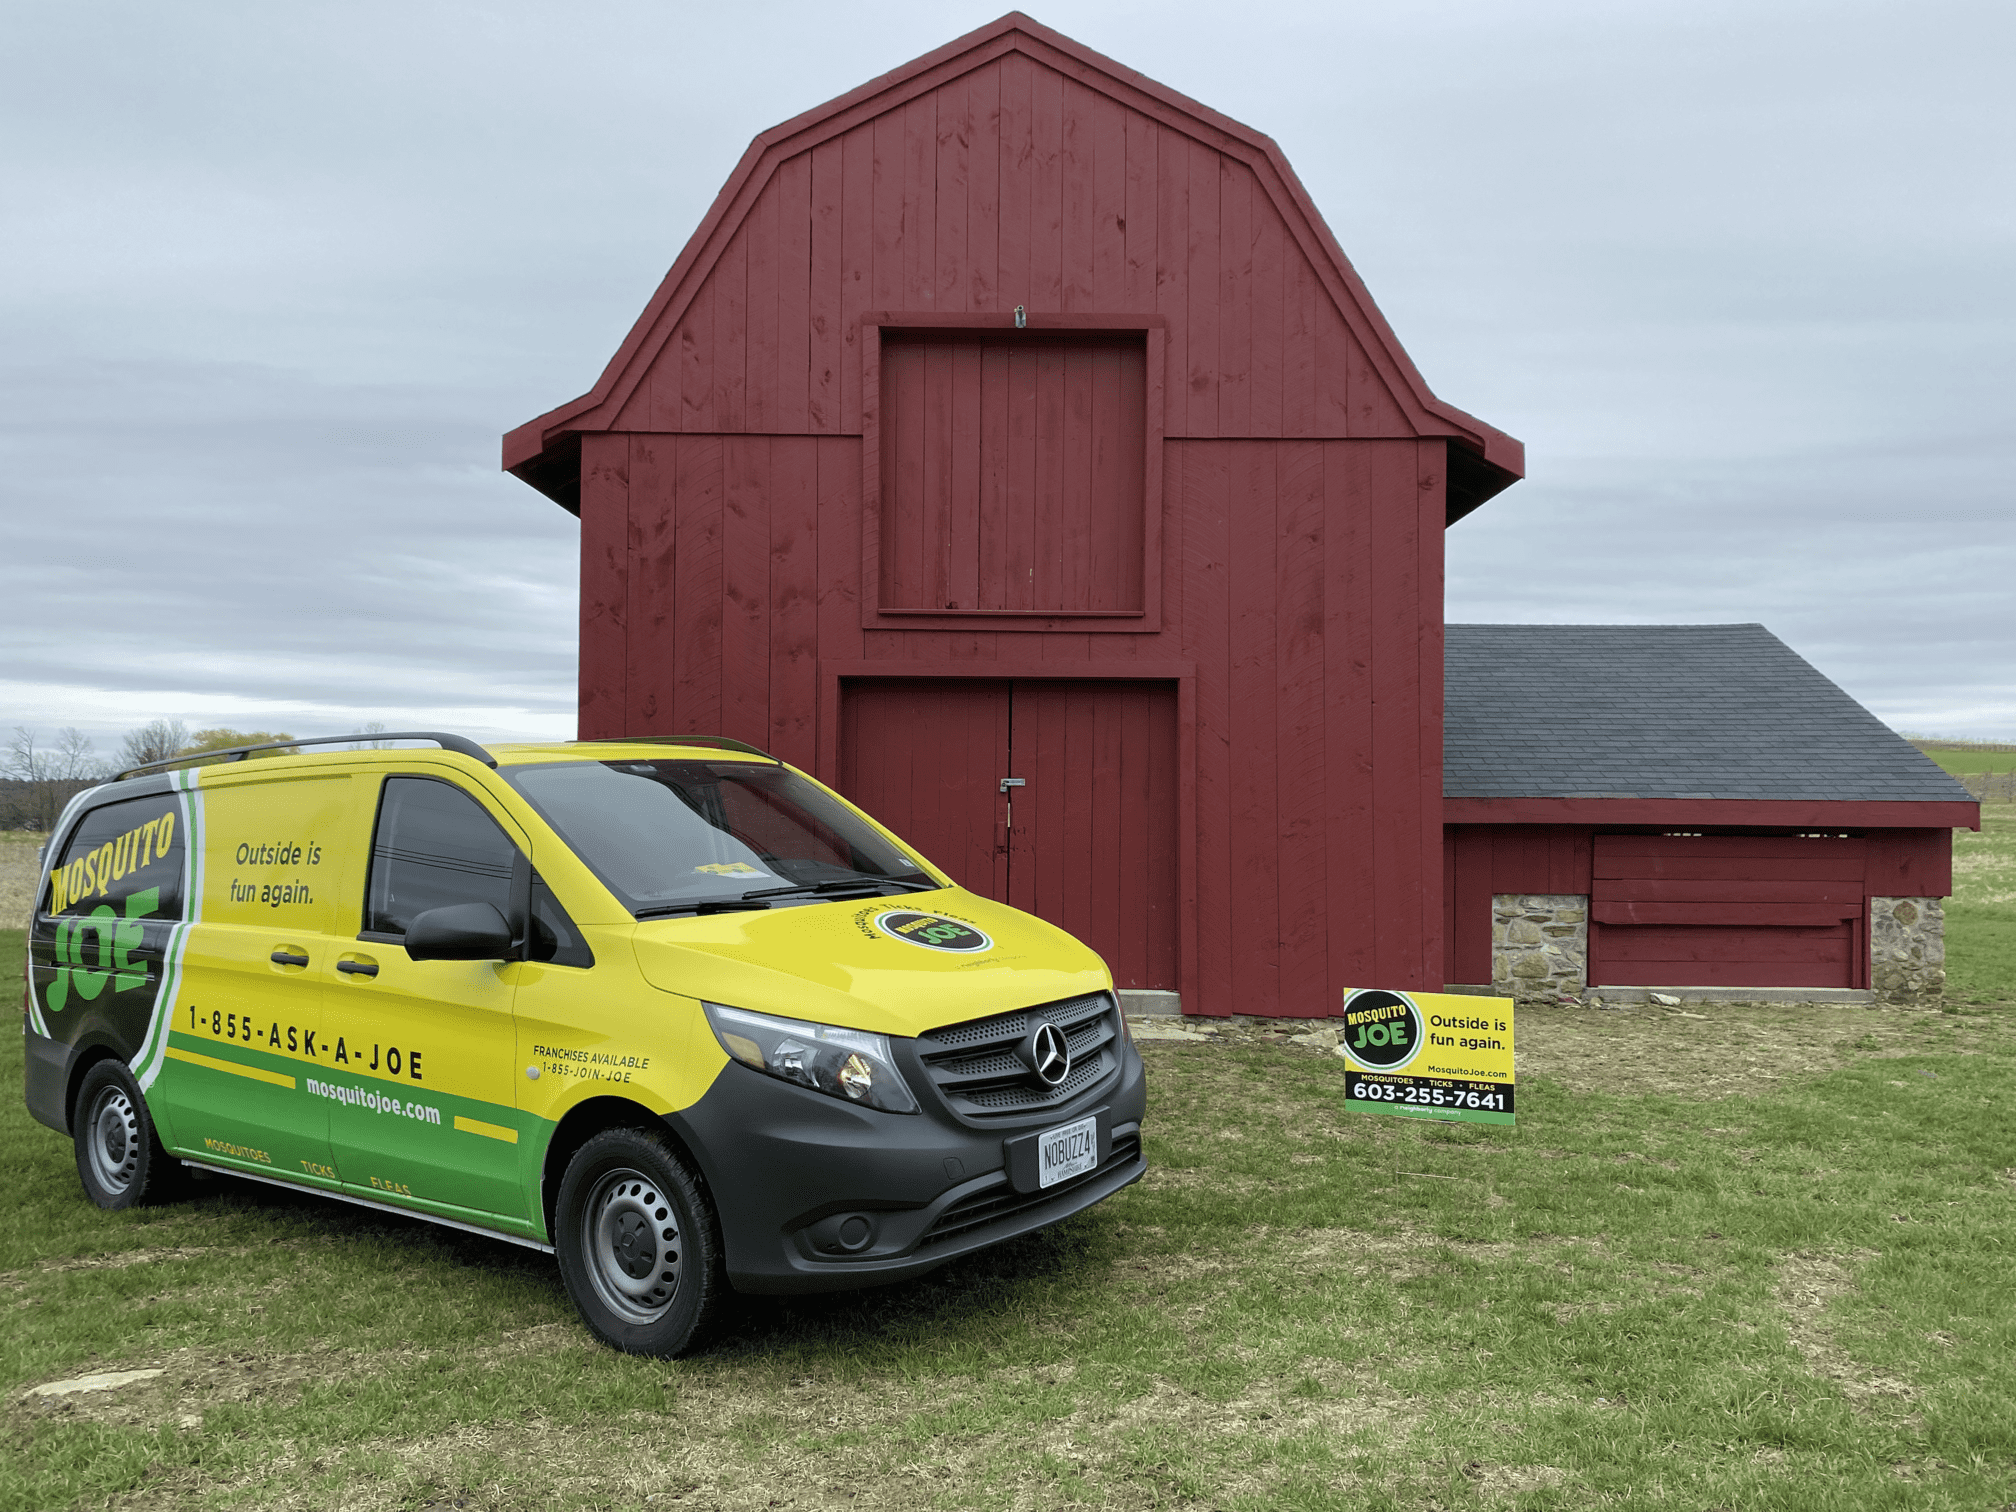 Mosquito Joe of Manchester-Souhegan Valley yellow and green truck and yard sign in front of red barn located in Hollis, New Hampshire. 